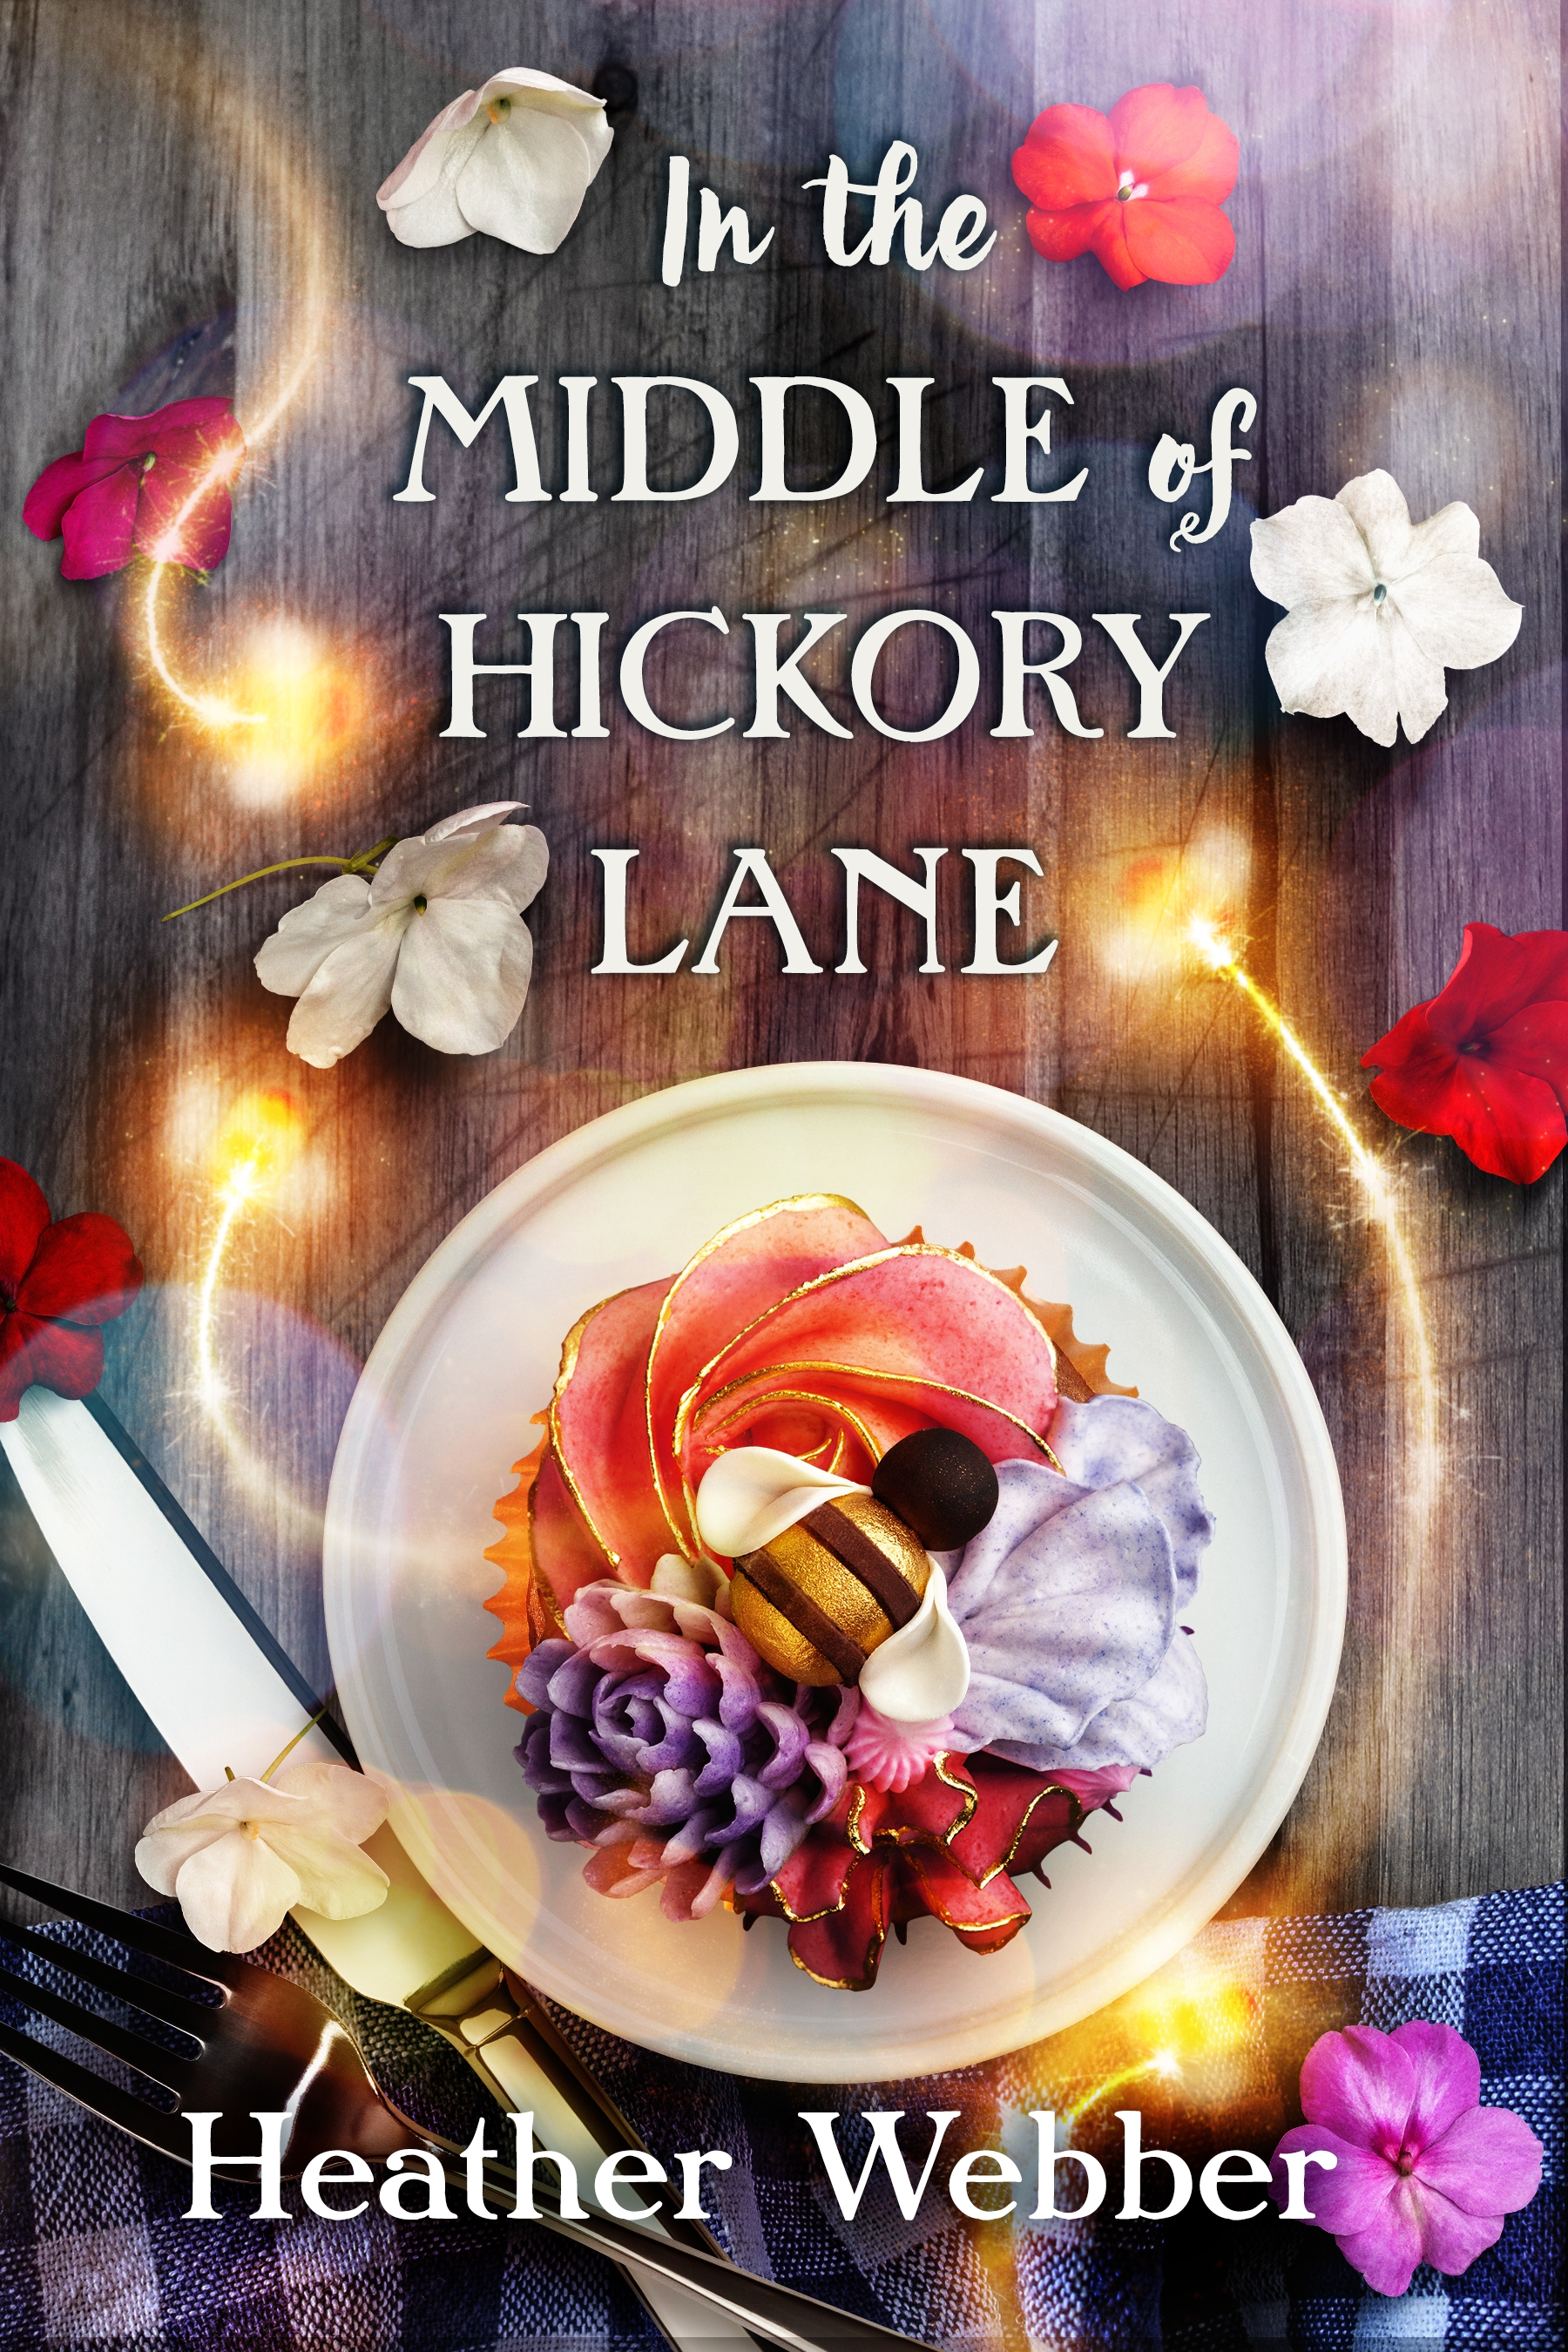 In the Middle of Hickory Lane by Heather Webber